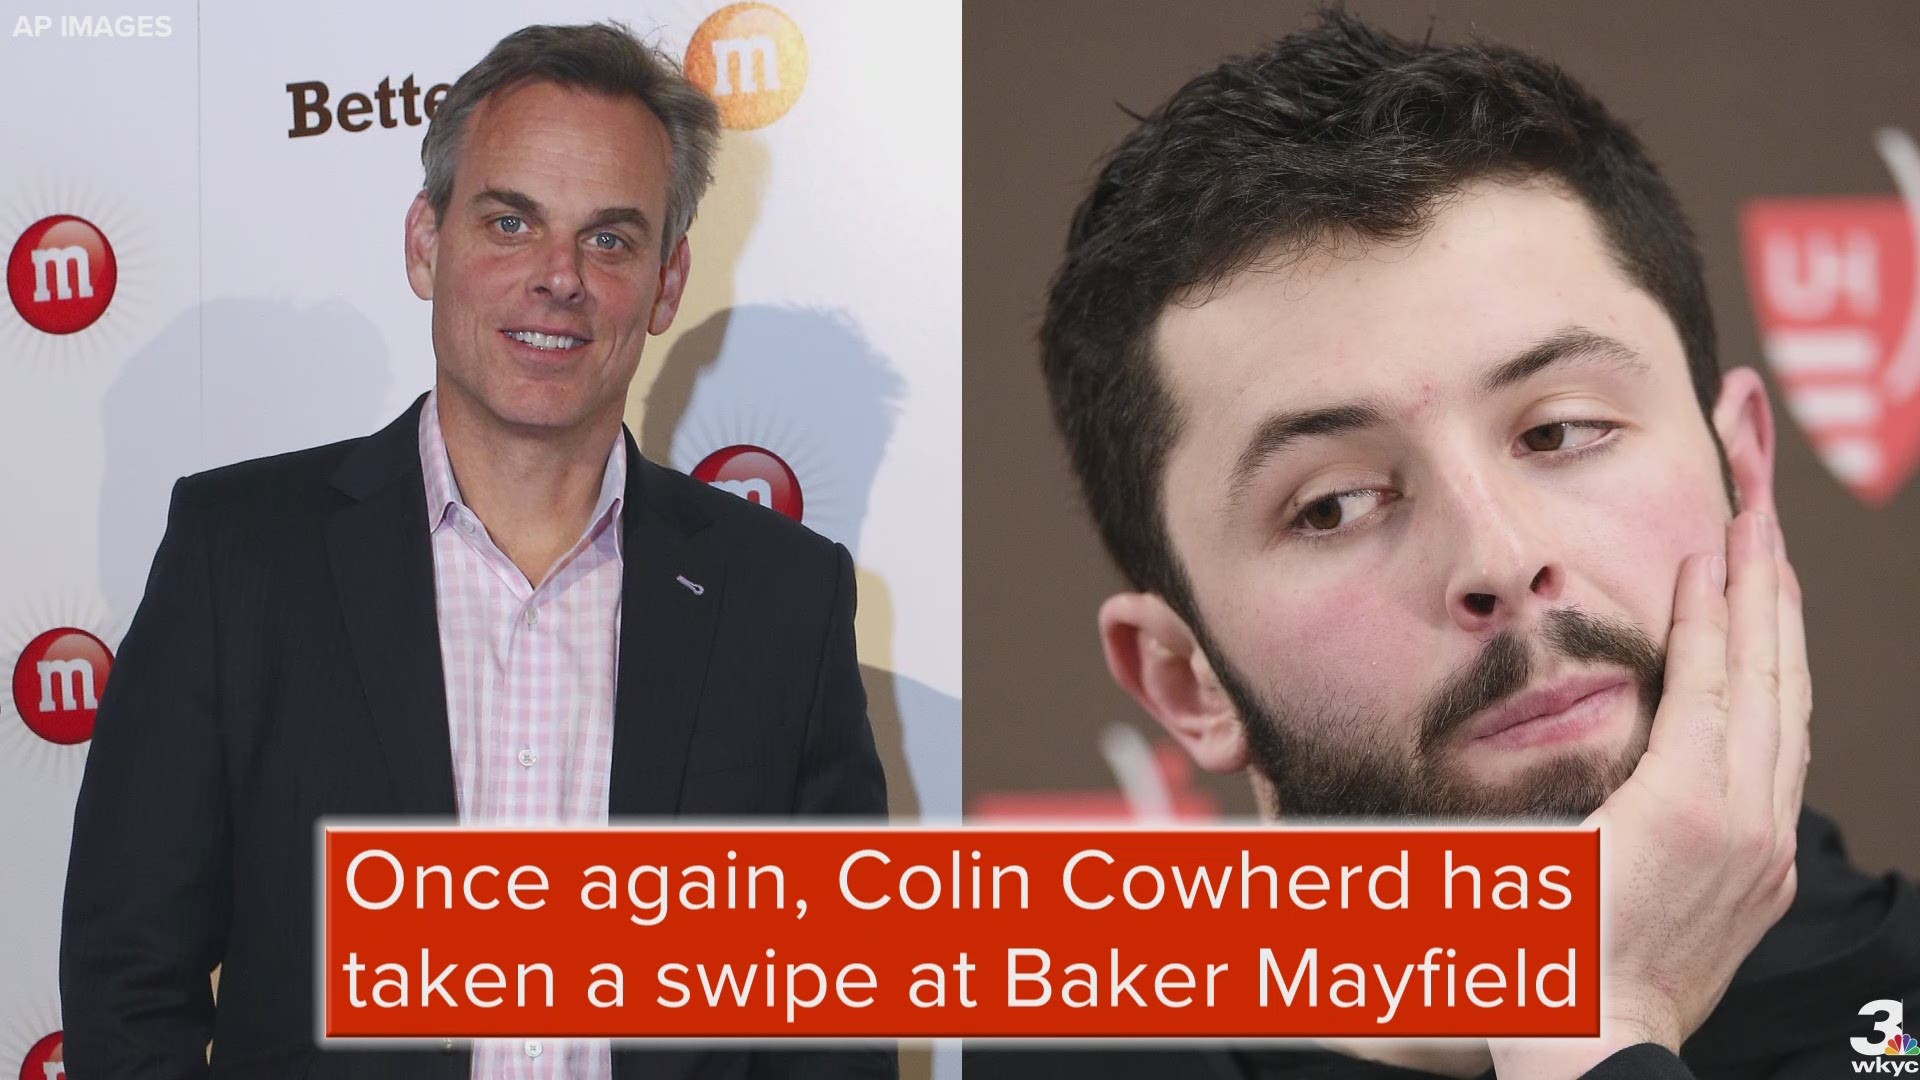 In the latest chapter of their year-long feud, Cleveland Browns quarterback Baker Mayfield took issue with a rant in which Fox Sports Radio's Colin Cowherd referred to him and general manager John Dorsey as "peas in a pod."